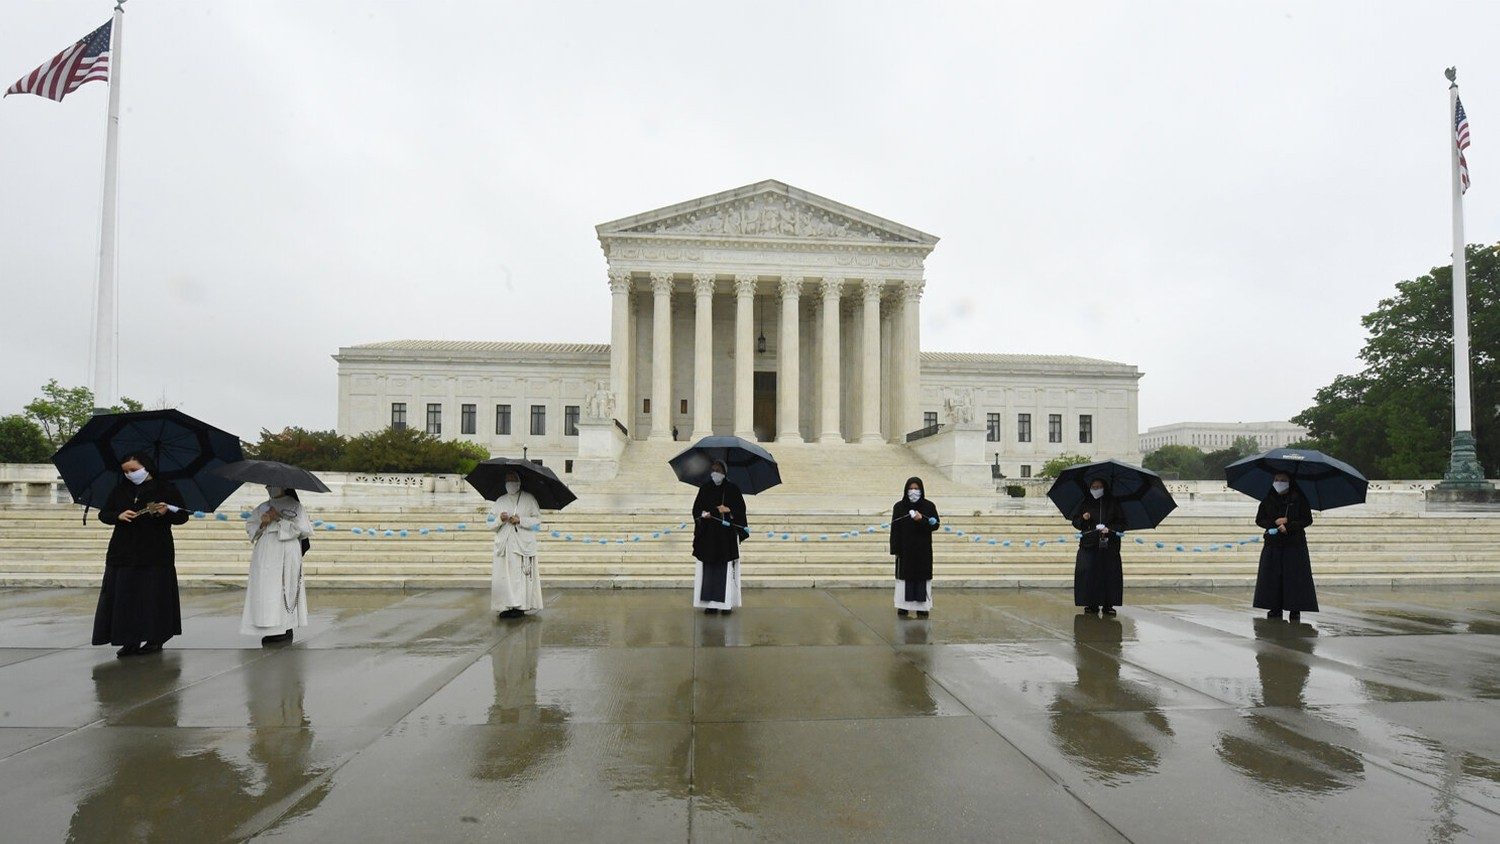 The Supreme Court has another chance to uphold religious liberty for small  business owners